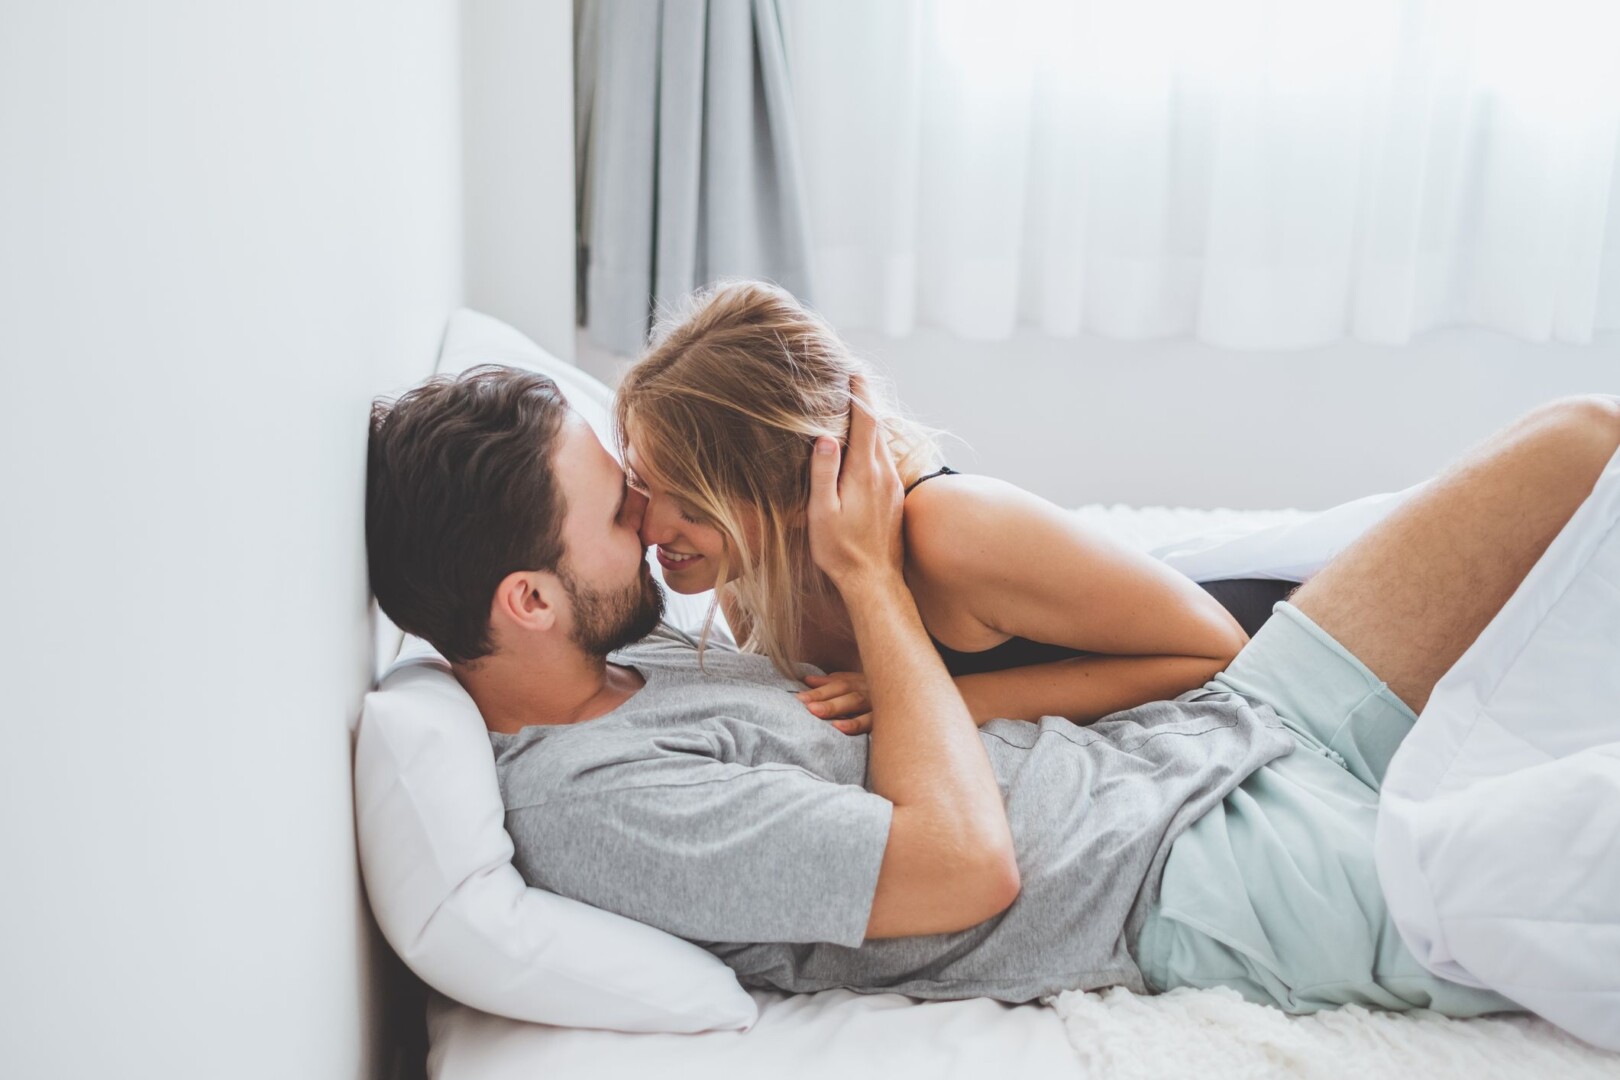 Young Couple Kissing On Bed Royalty Free Image 1644331537